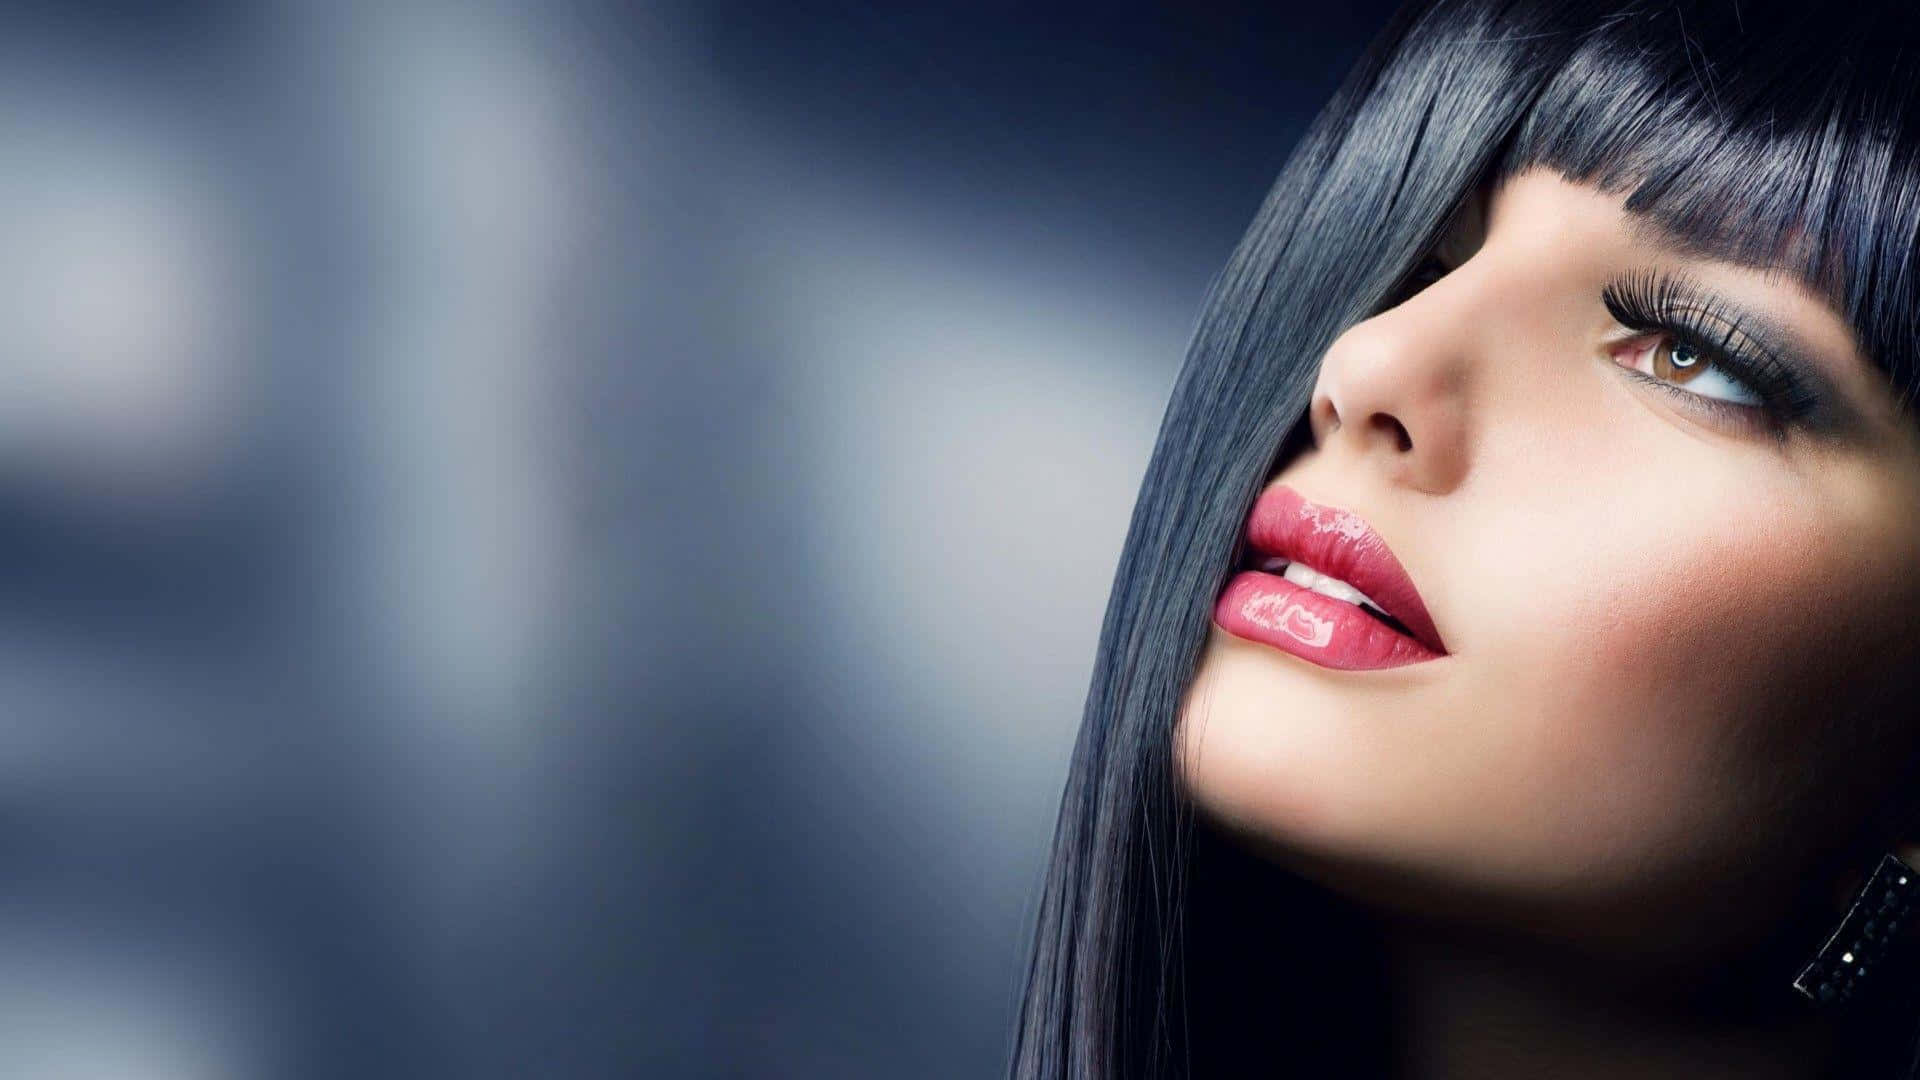 A Woman With Long Black Hair And Black Lipstick